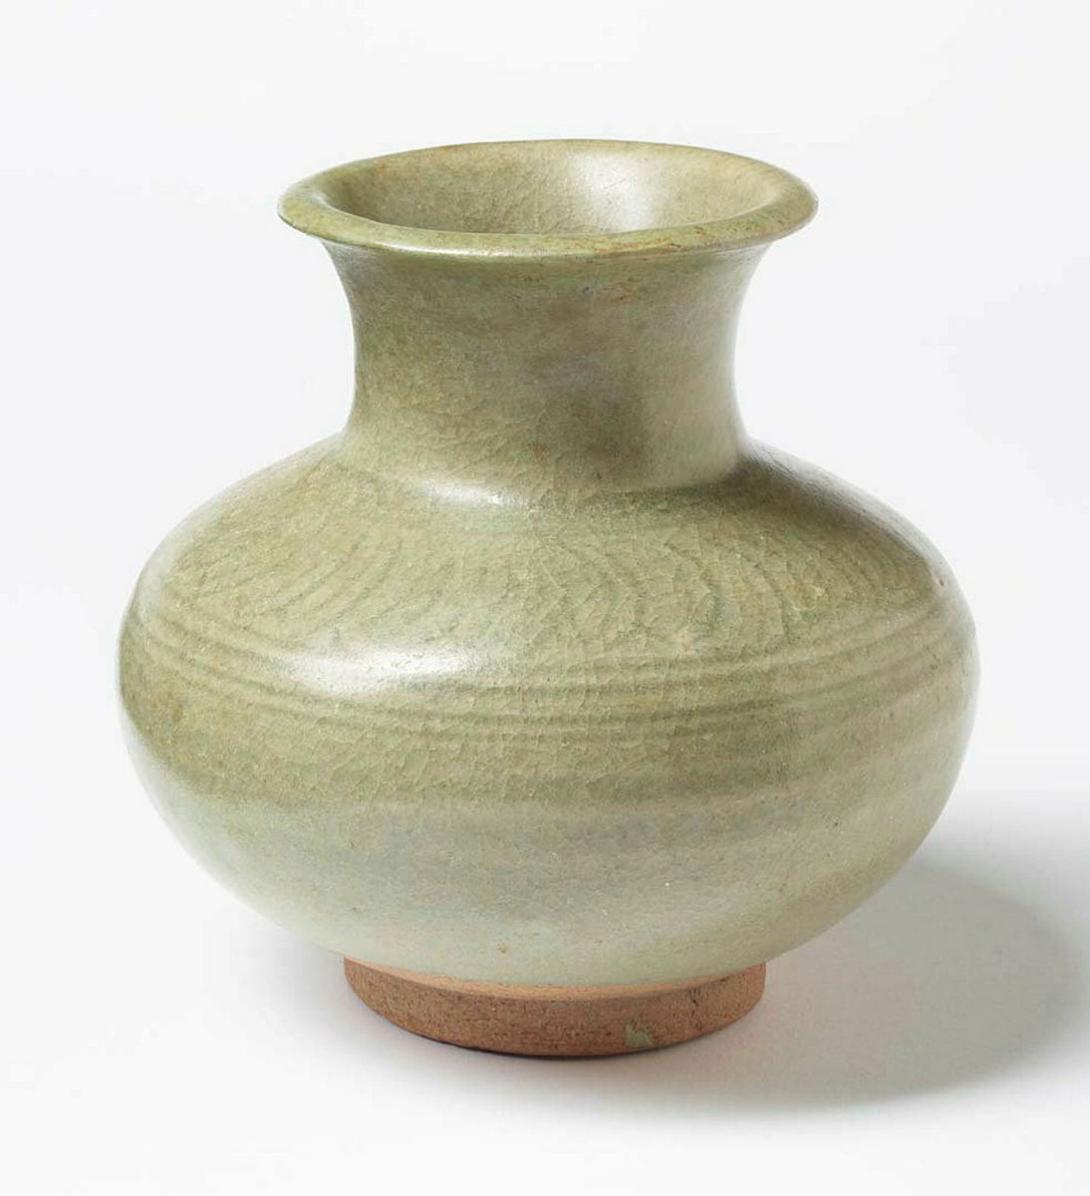 Artwork Celadon baluster jar this artwork made of Stoneware with celadon glaze and incised decorative bands, created in 1300-01-01